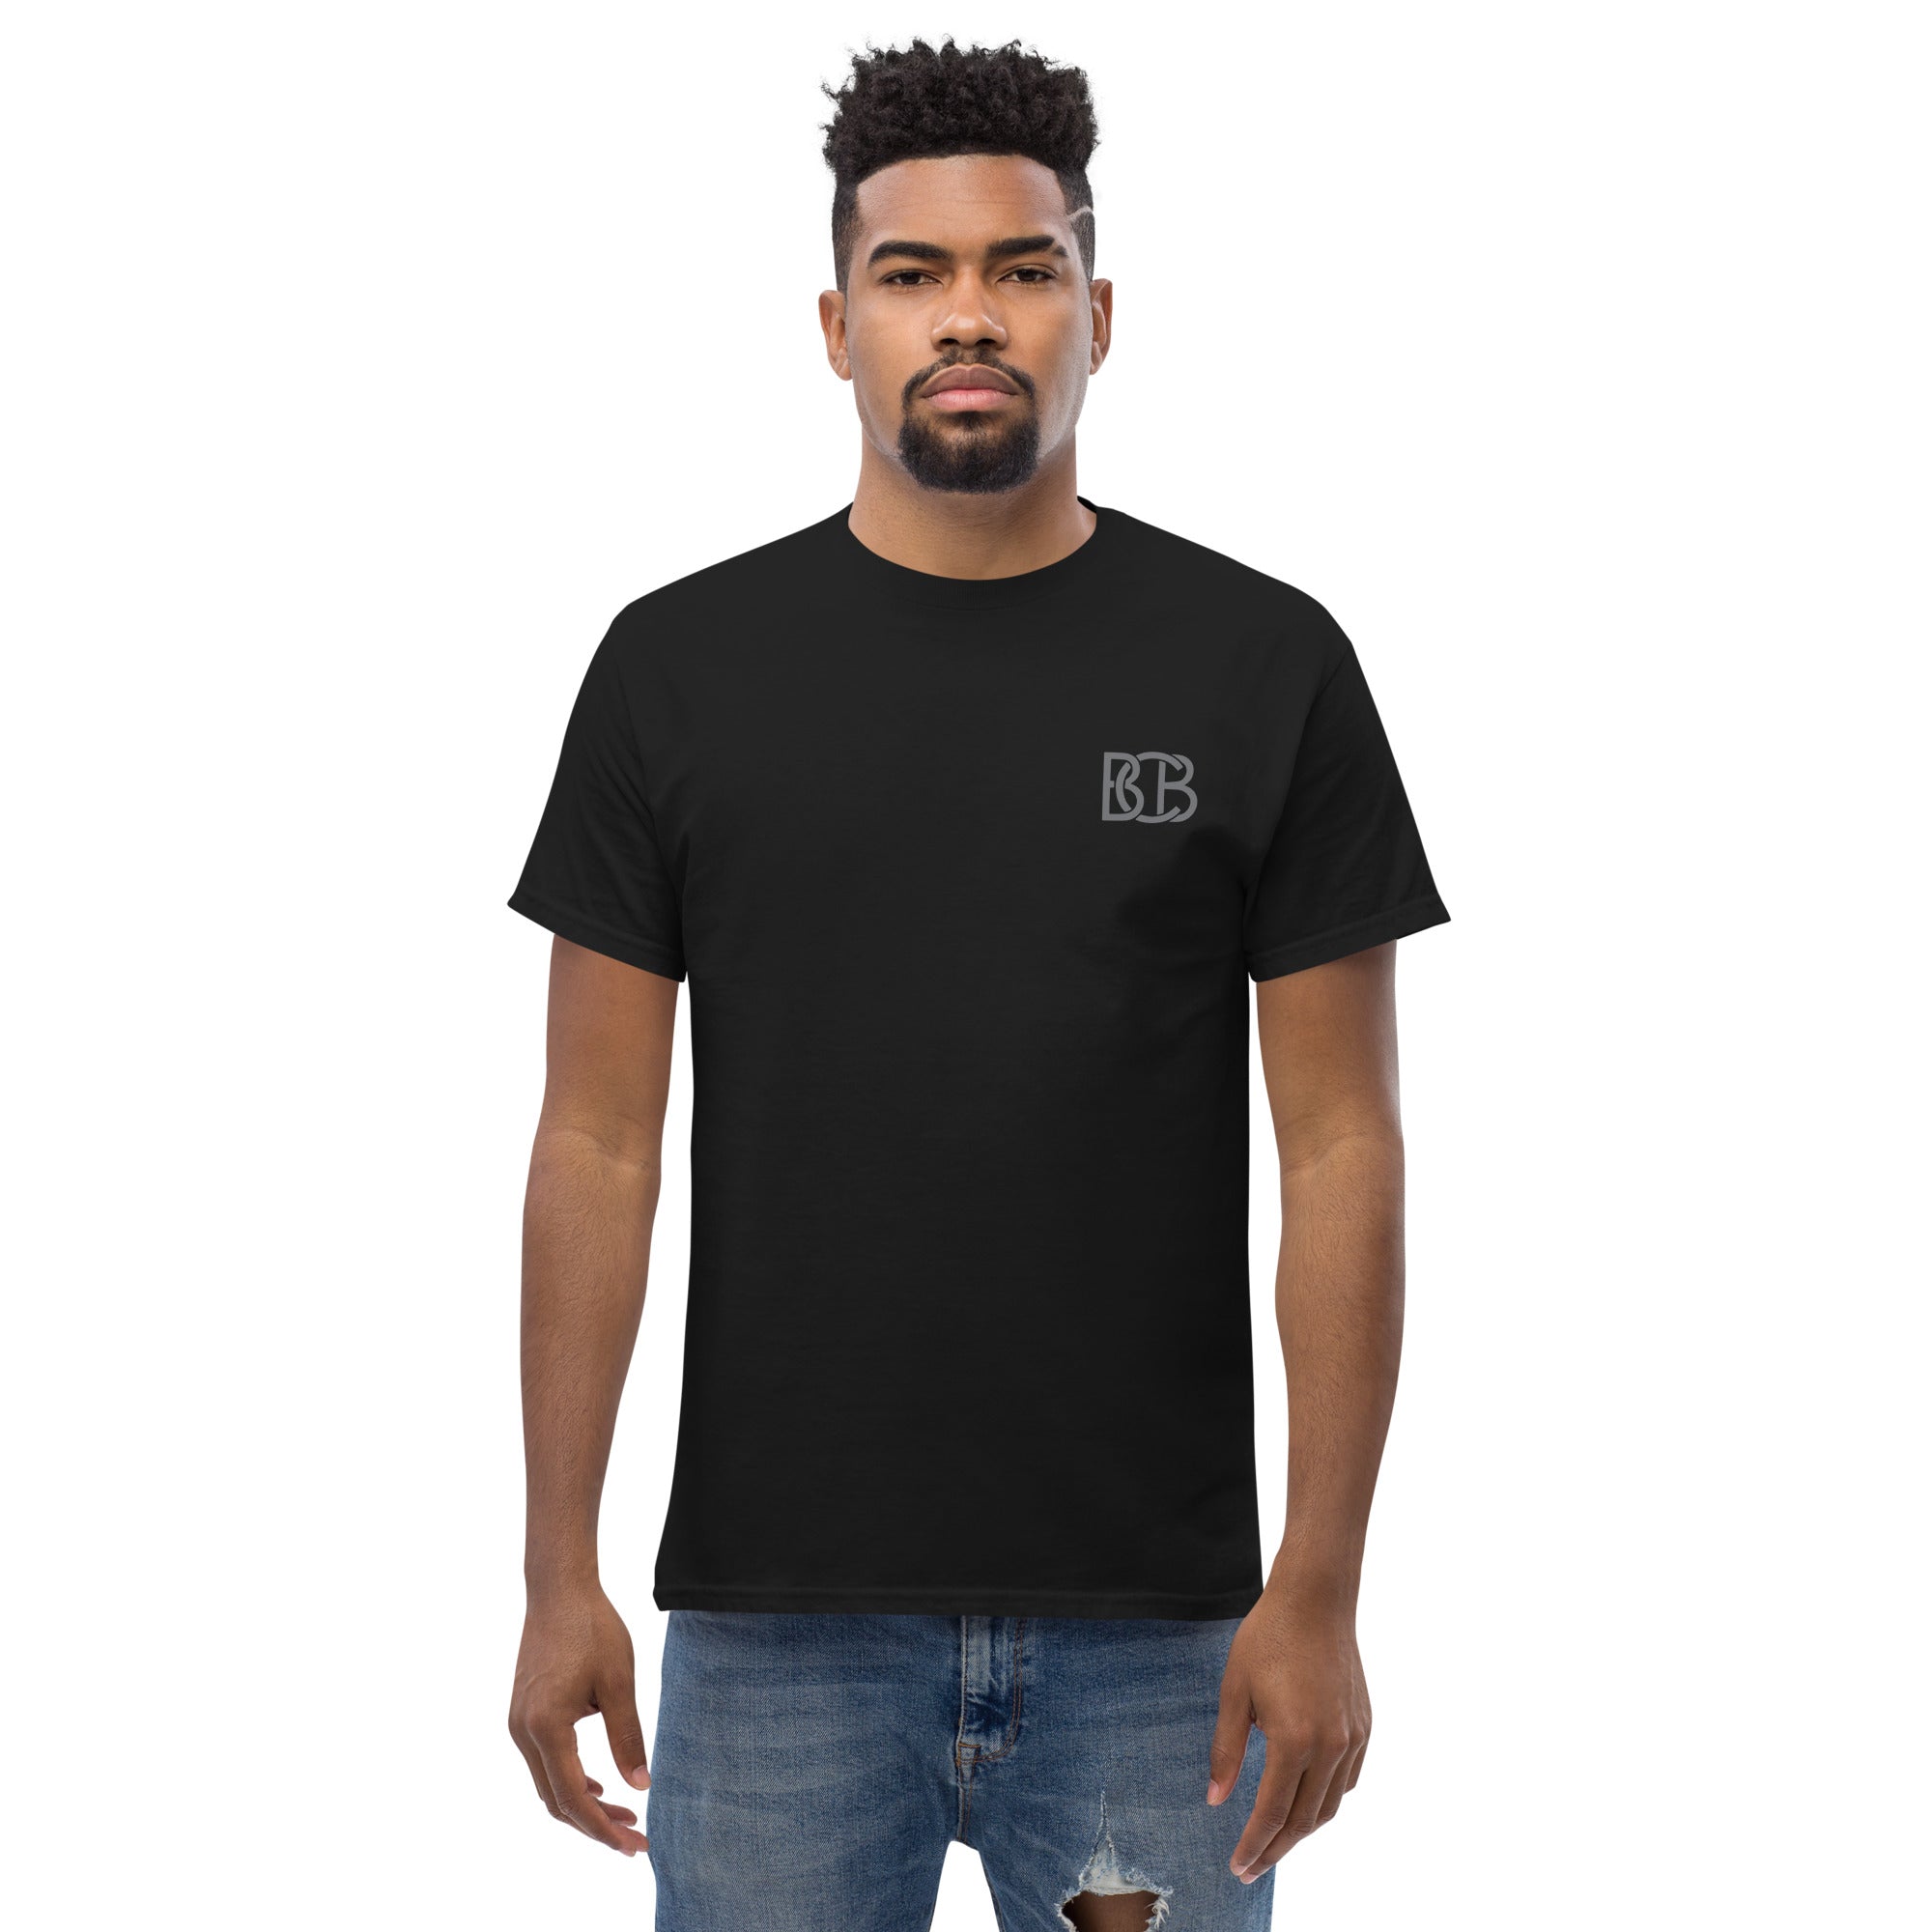 No Suits and Ties and All Their Lies  I  Men's classic tee